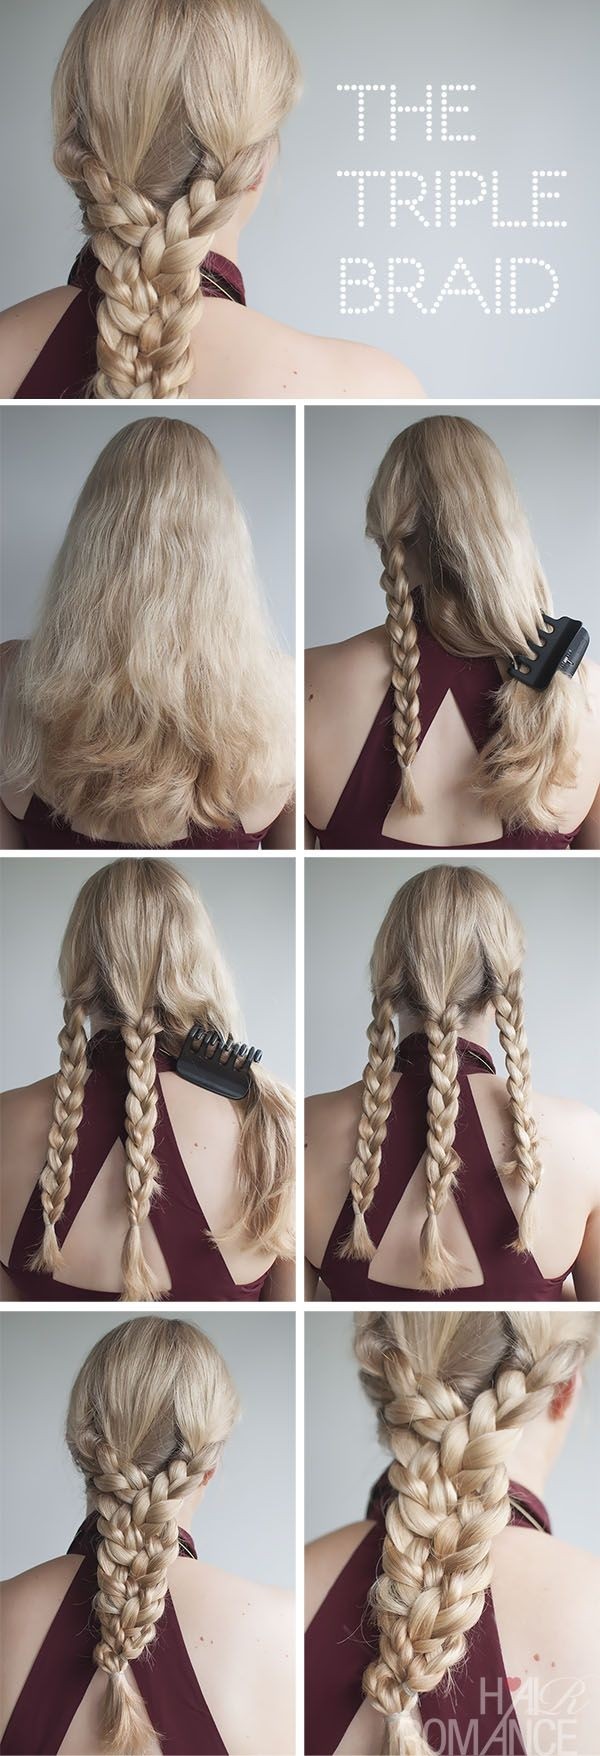 Triple Braided Hairstyle Tutorial for Summer